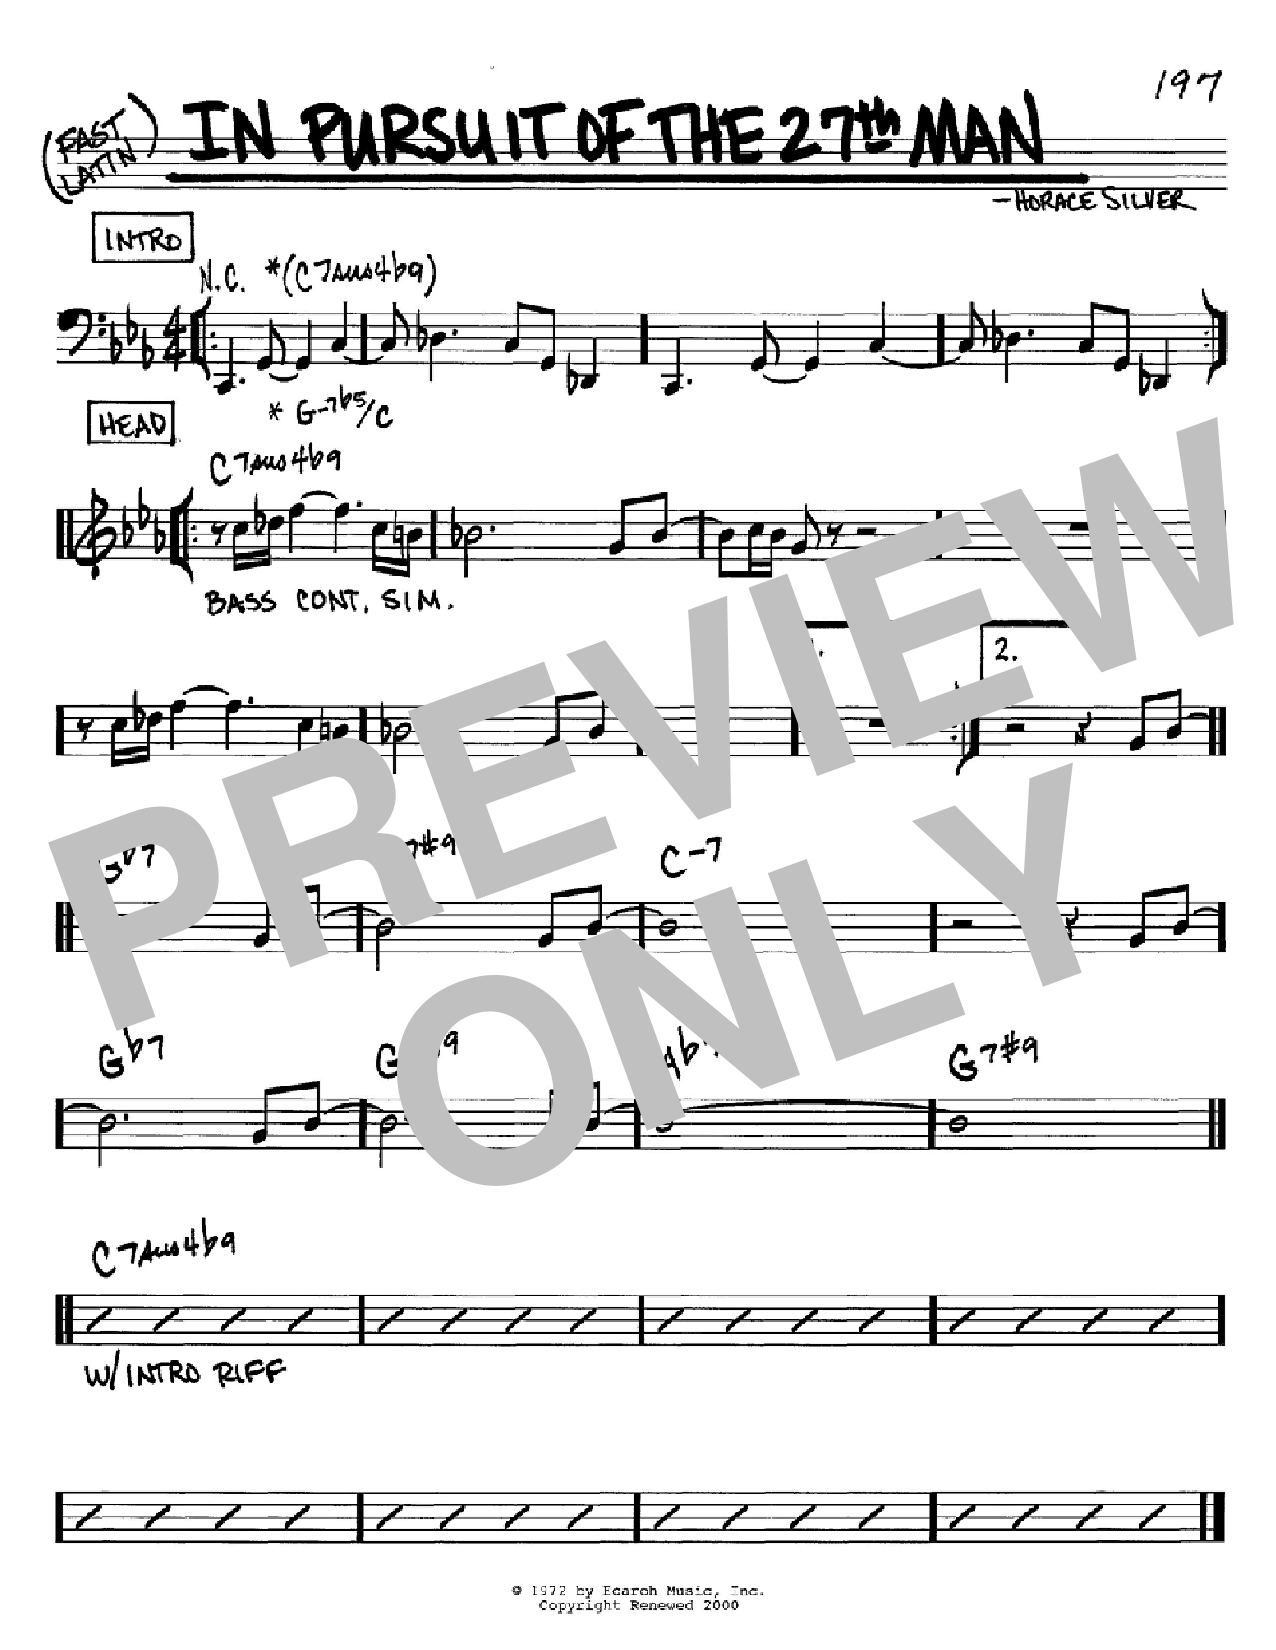 Download Horace Silver In Pursuit Of The 27th Man Sheet Music